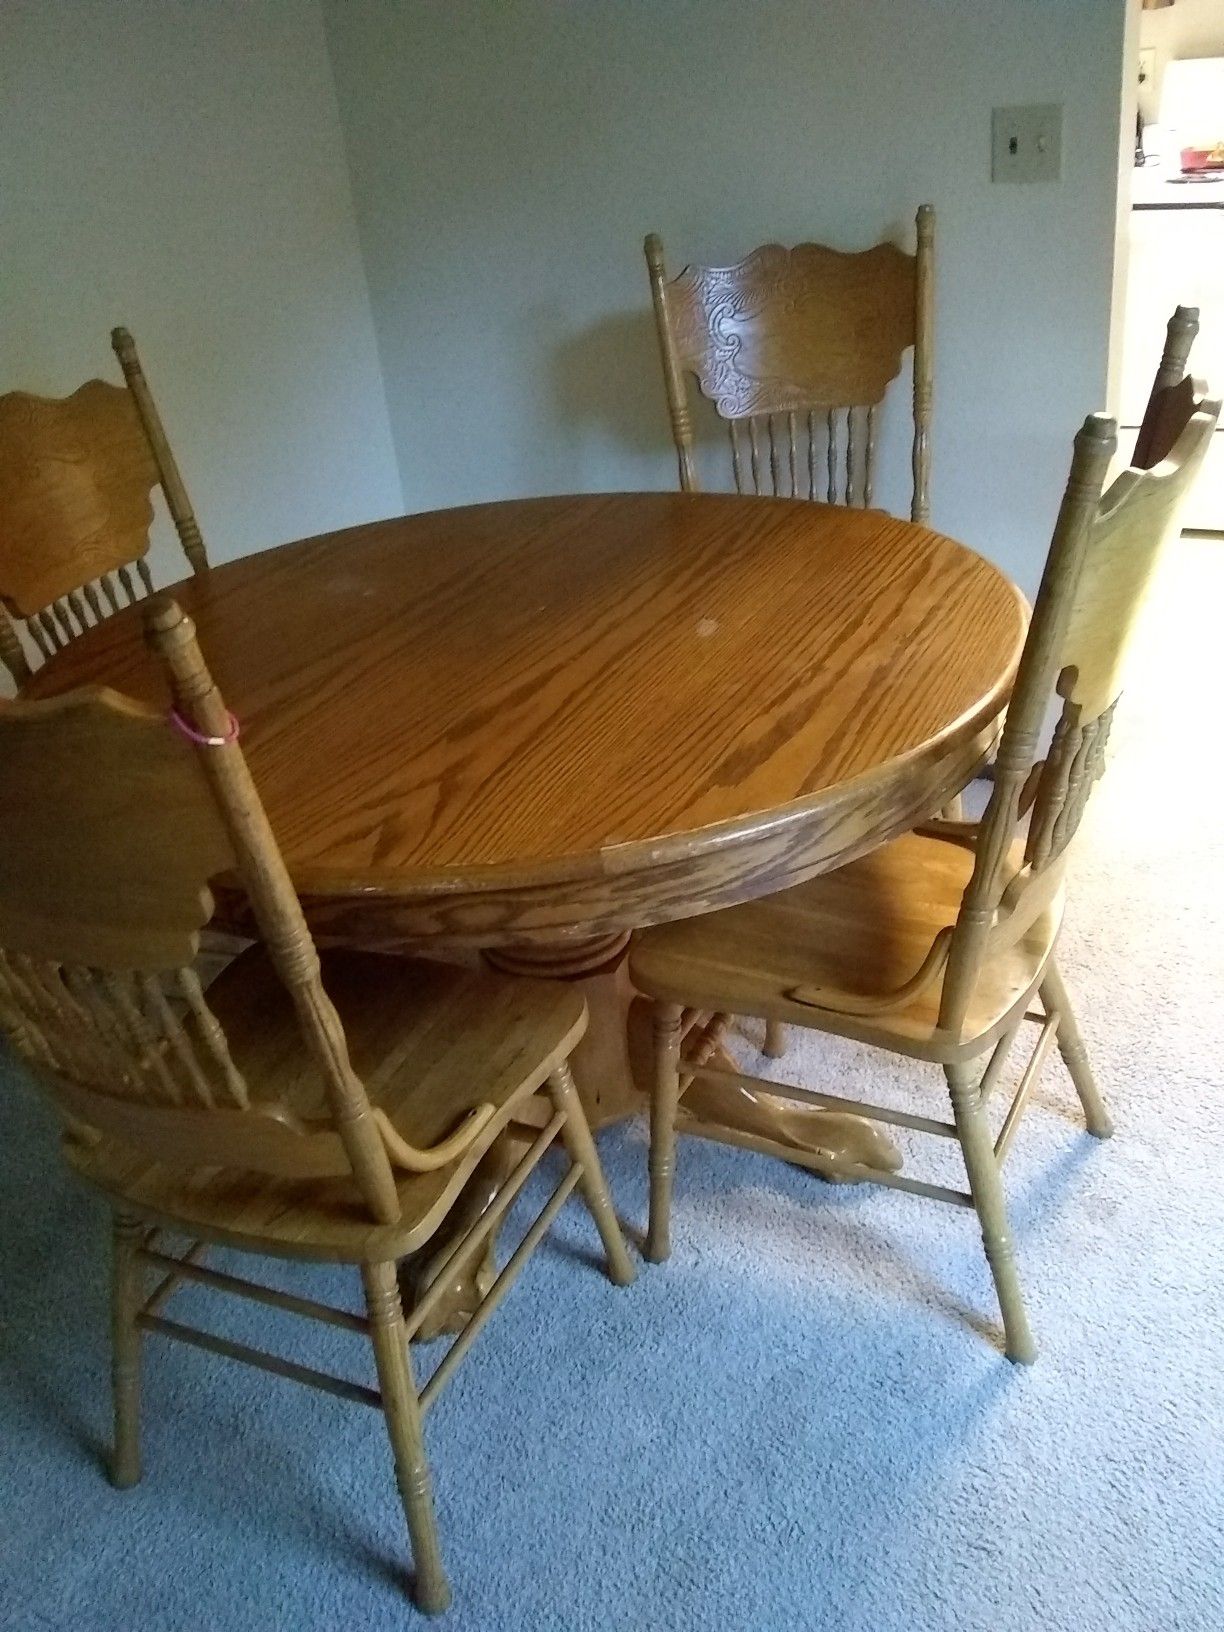 Oak dining room table with six chairs asking $125 or best offer